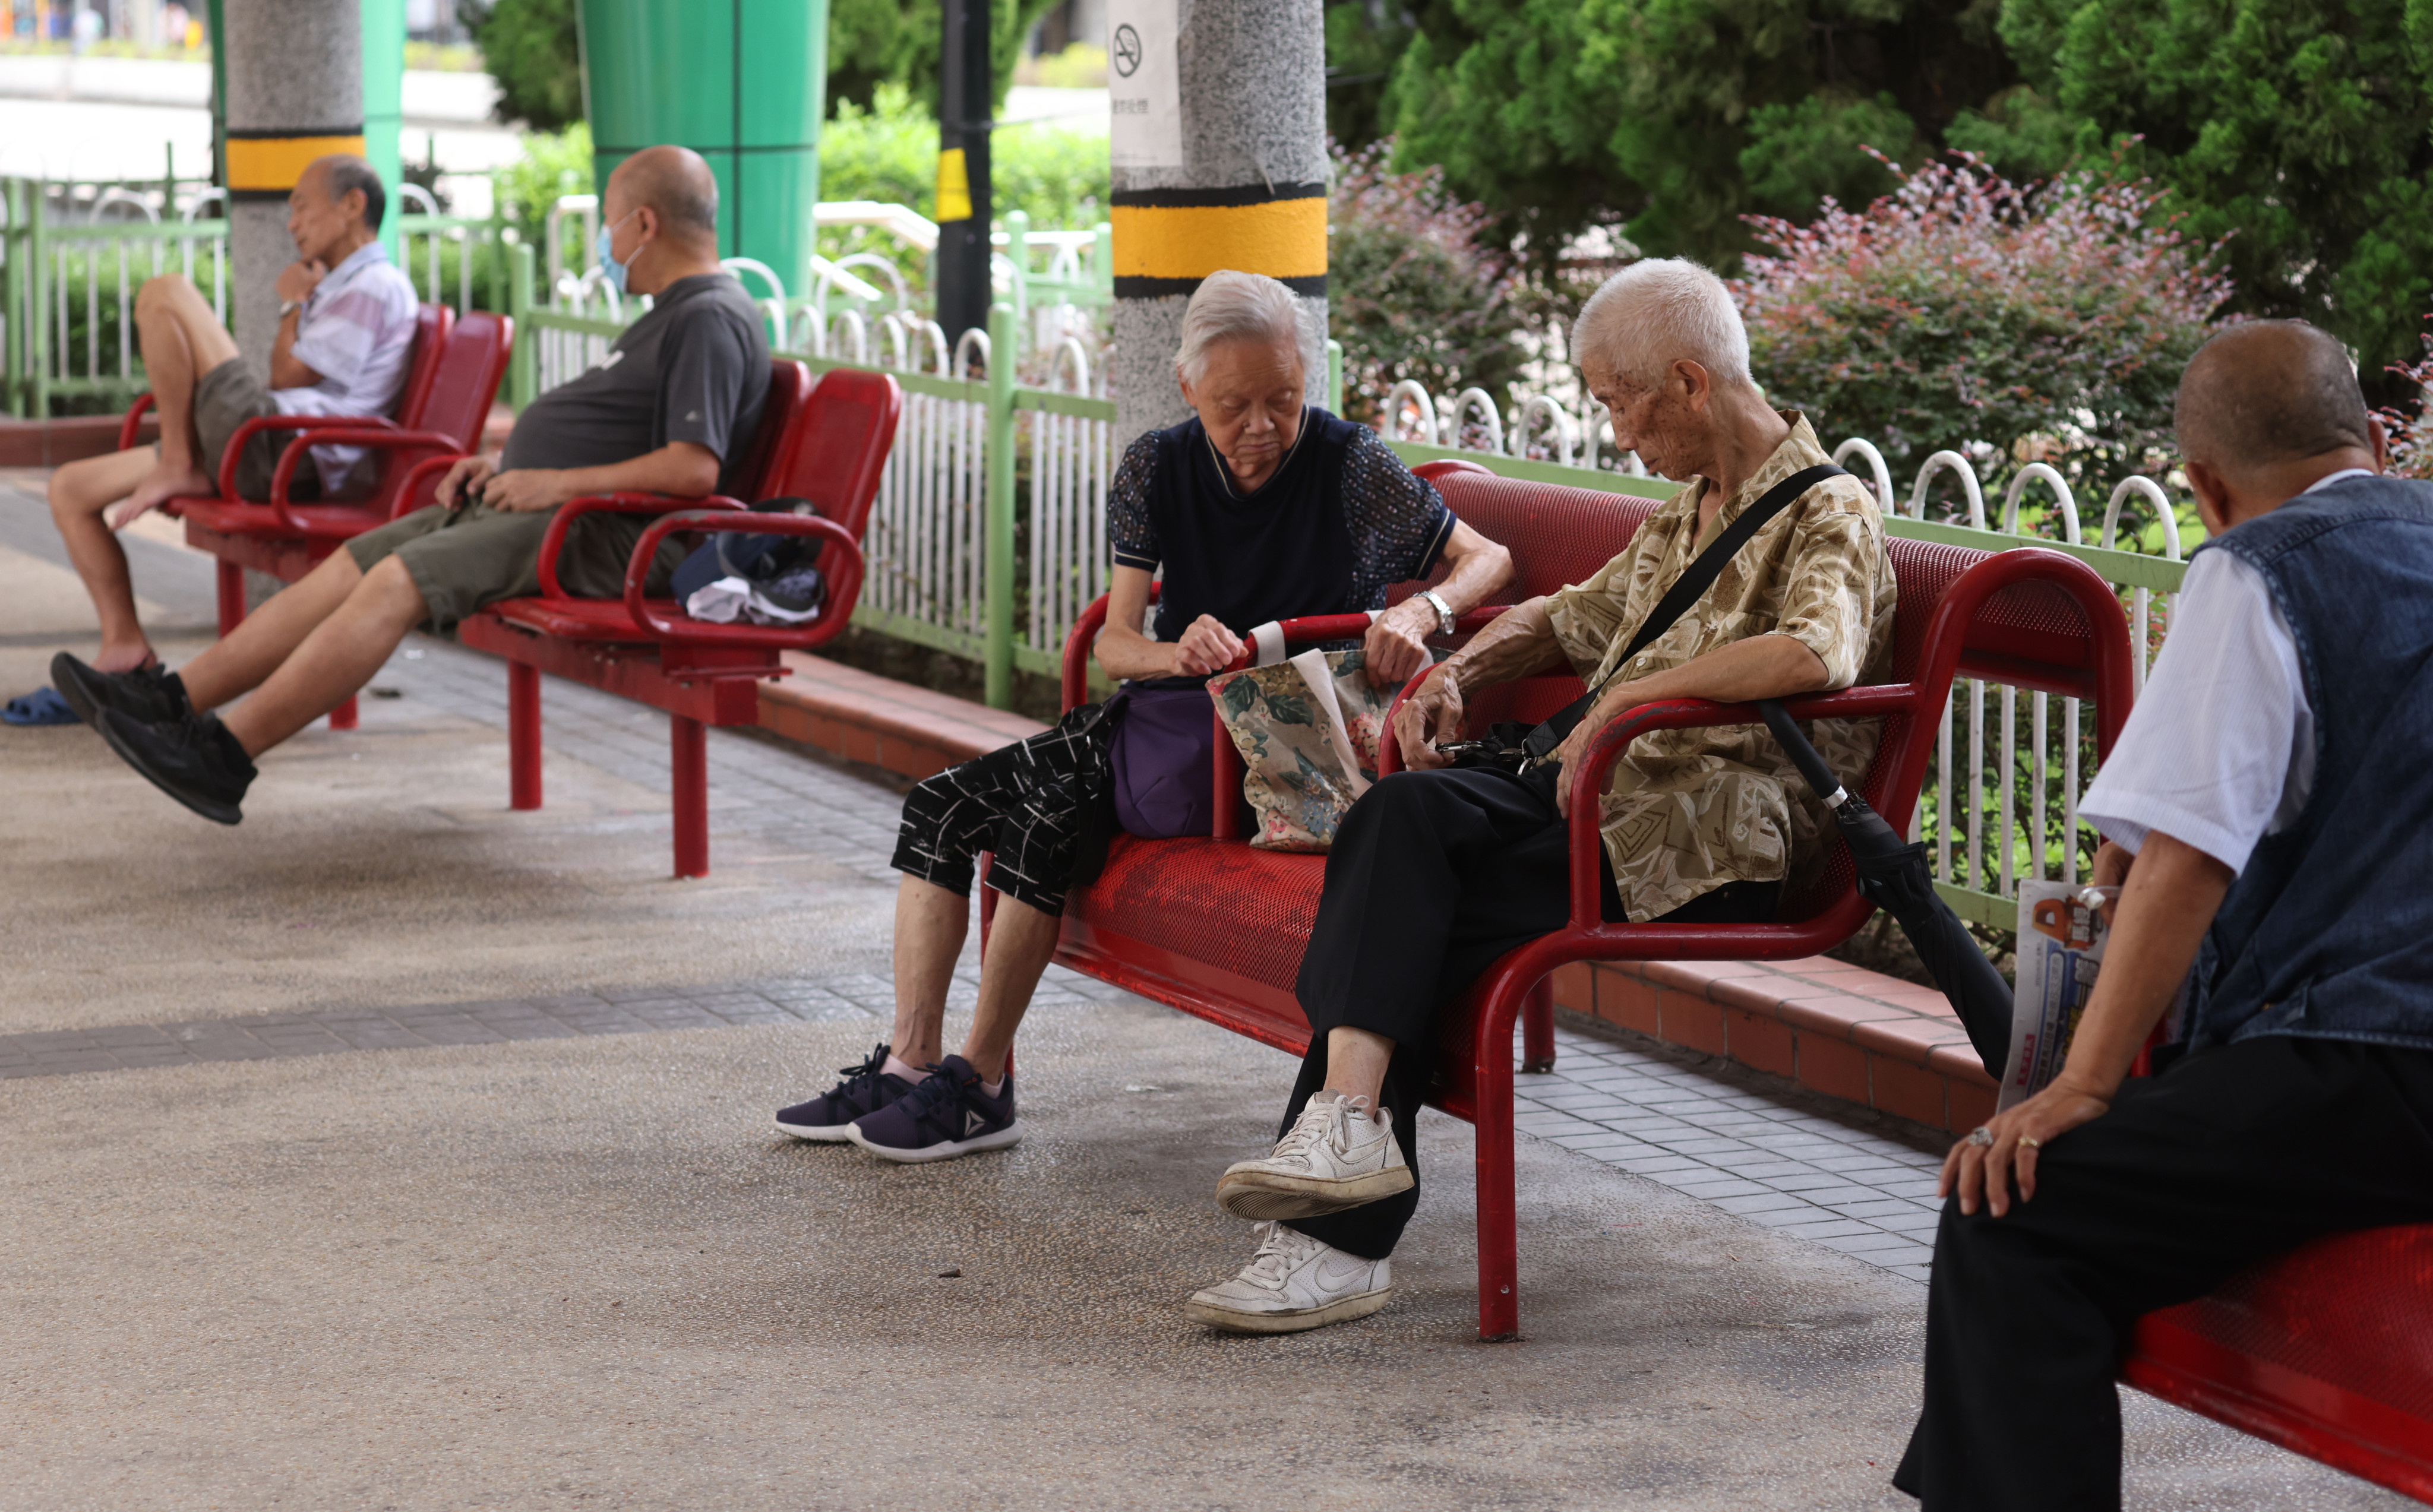 Campaigners have called for more support for vulnerable elderly people after a survey found high rates of depresion and anxiety among them. Photo: Yik Yeung-man